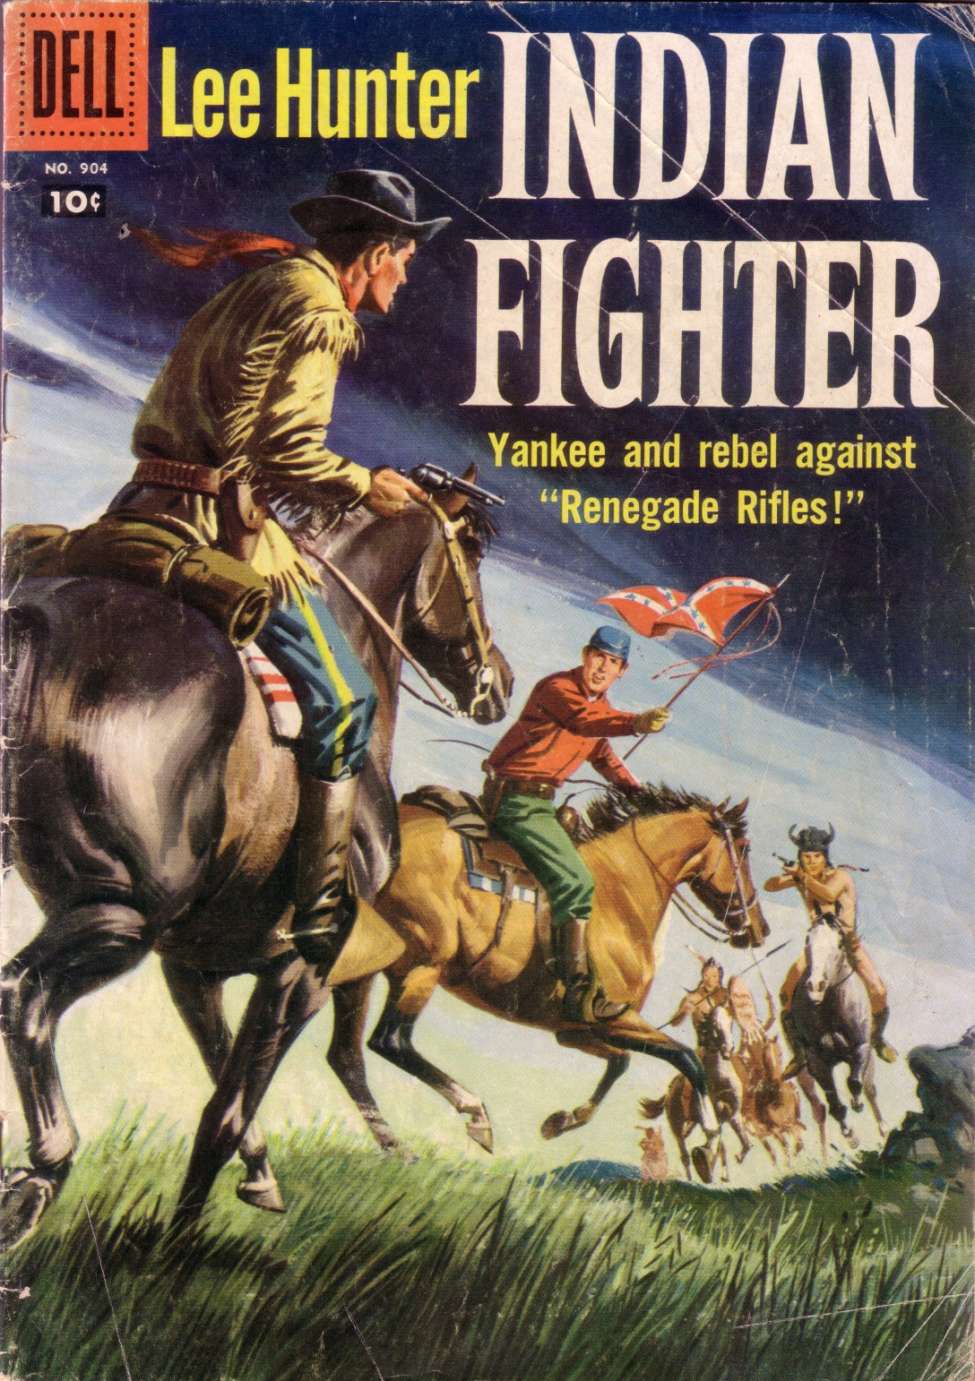 Book Cover For 0904 - Lee Hunter Indian Fighter